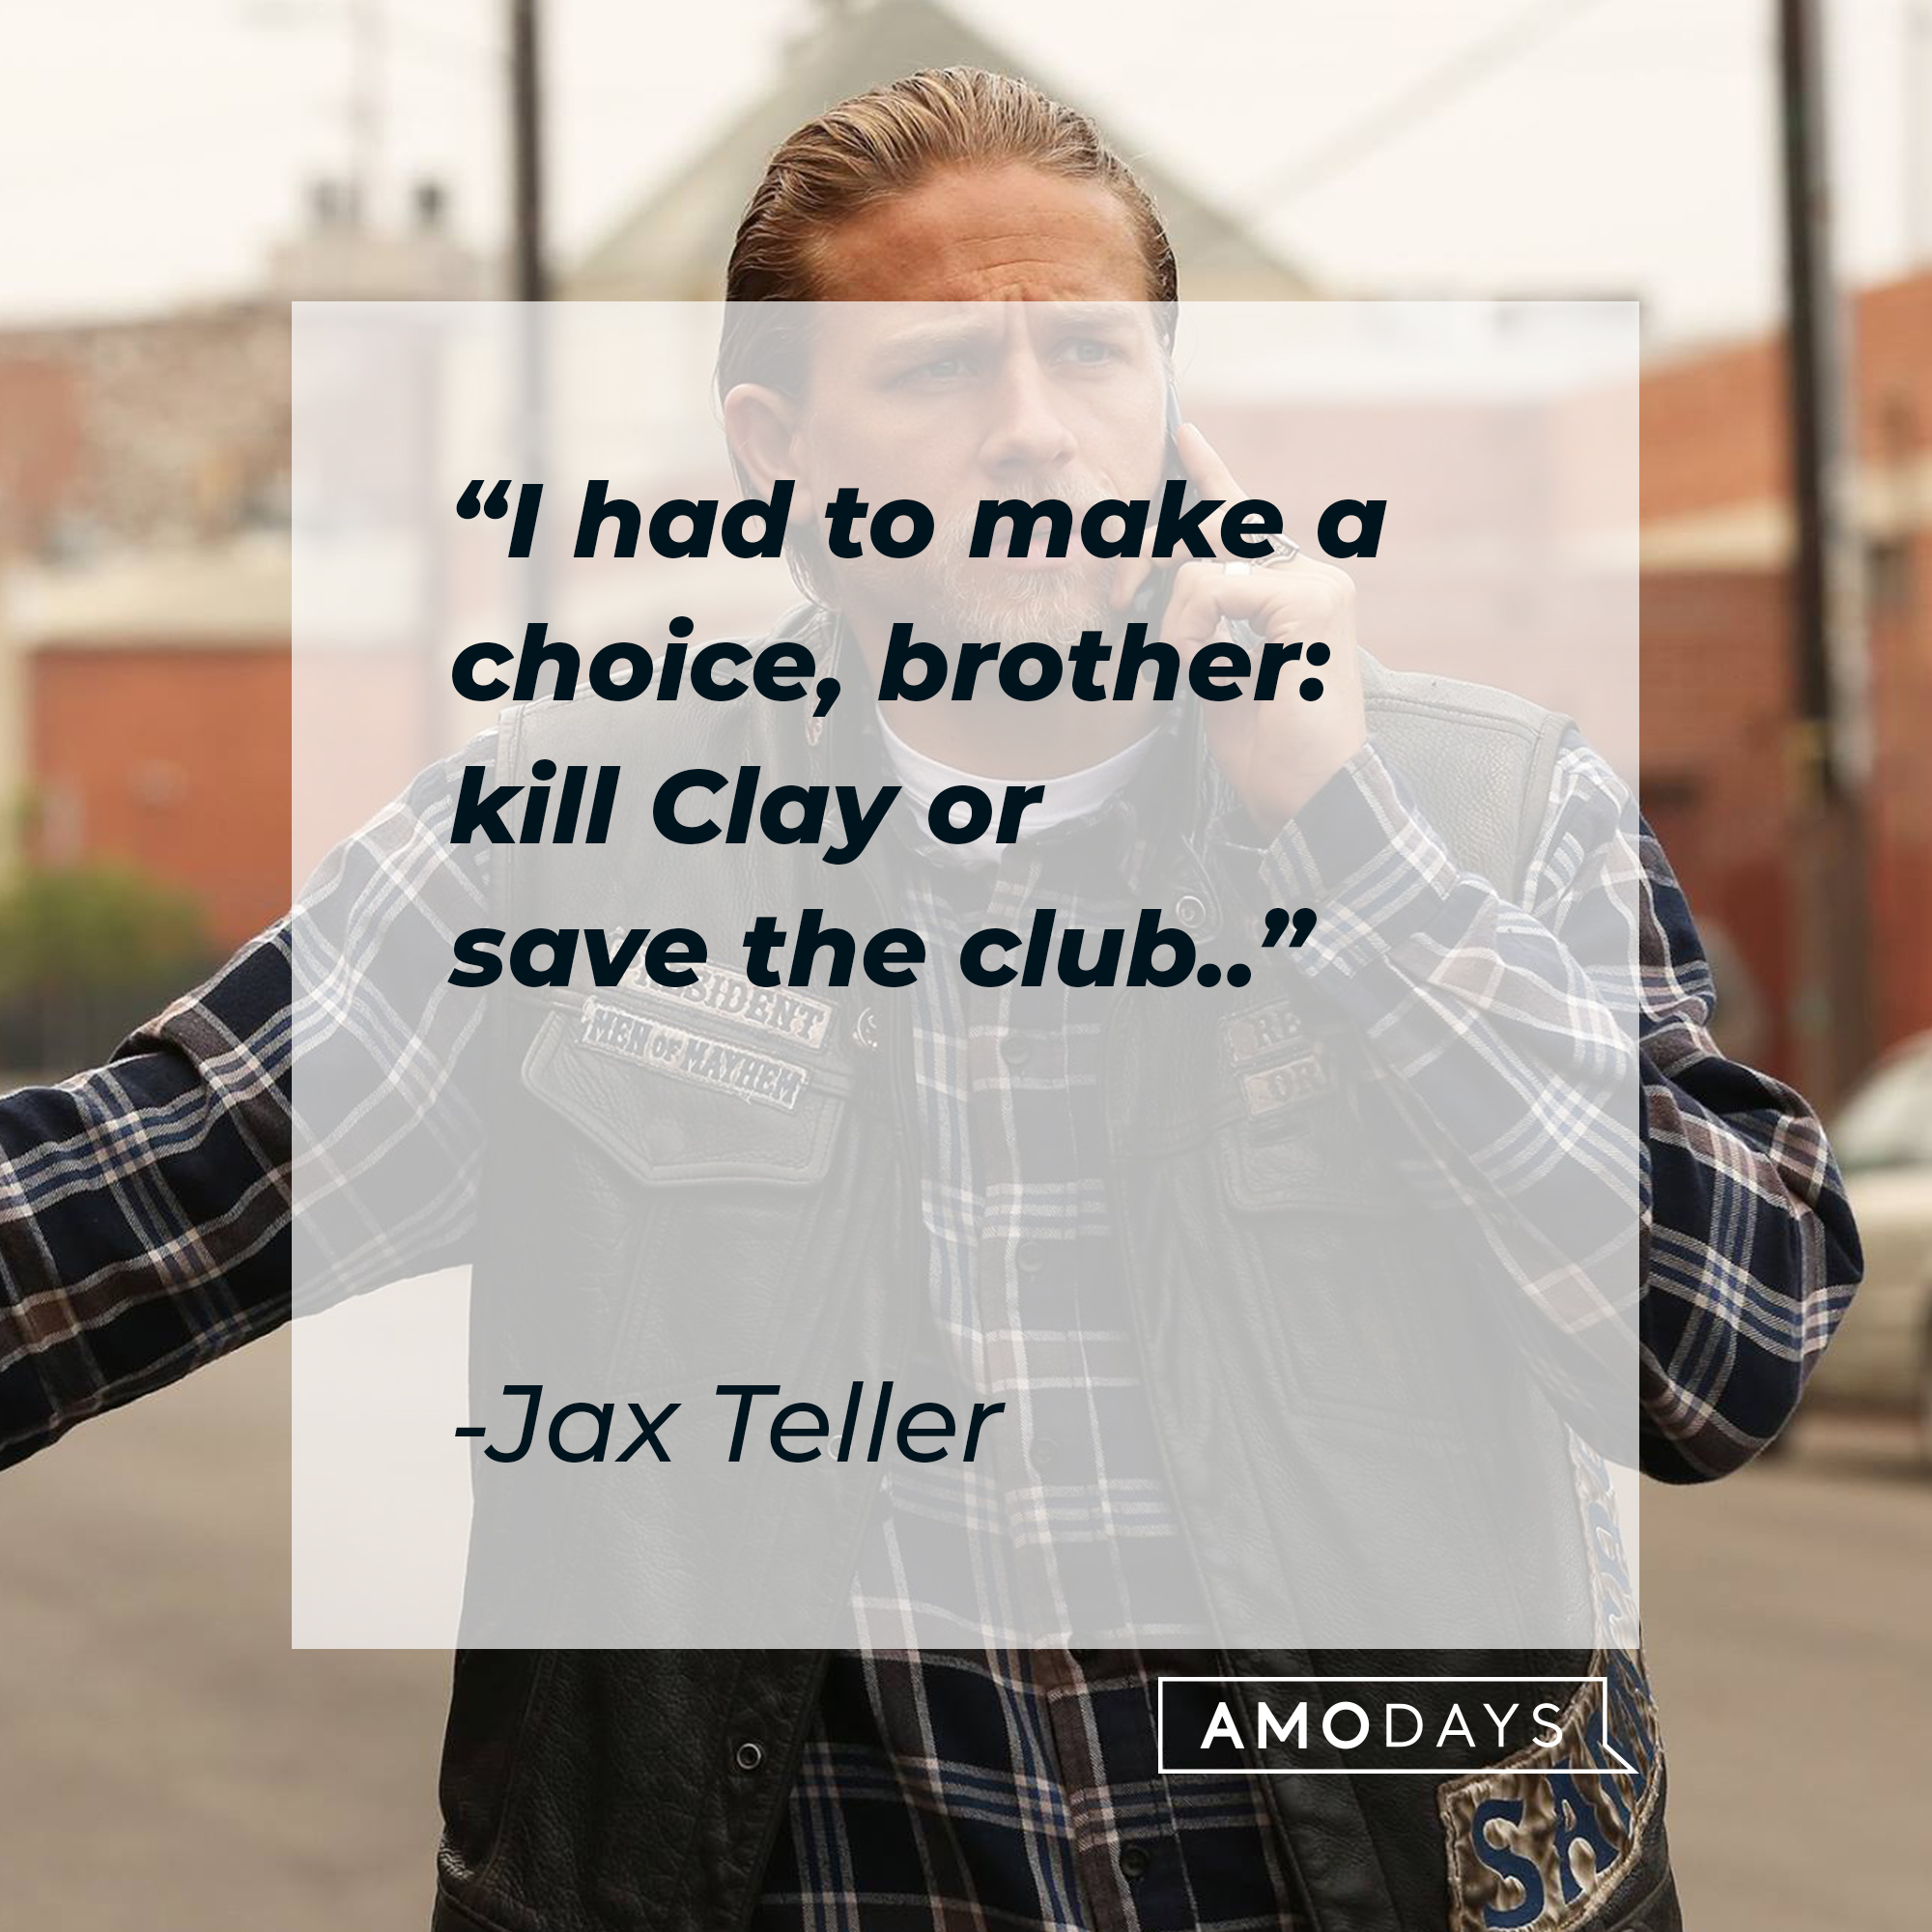 Jax Teller with his quote: “I had to make a choice, brother: kill Clay or save the club.” |  Source: facebook.com/SonsofAnarchy